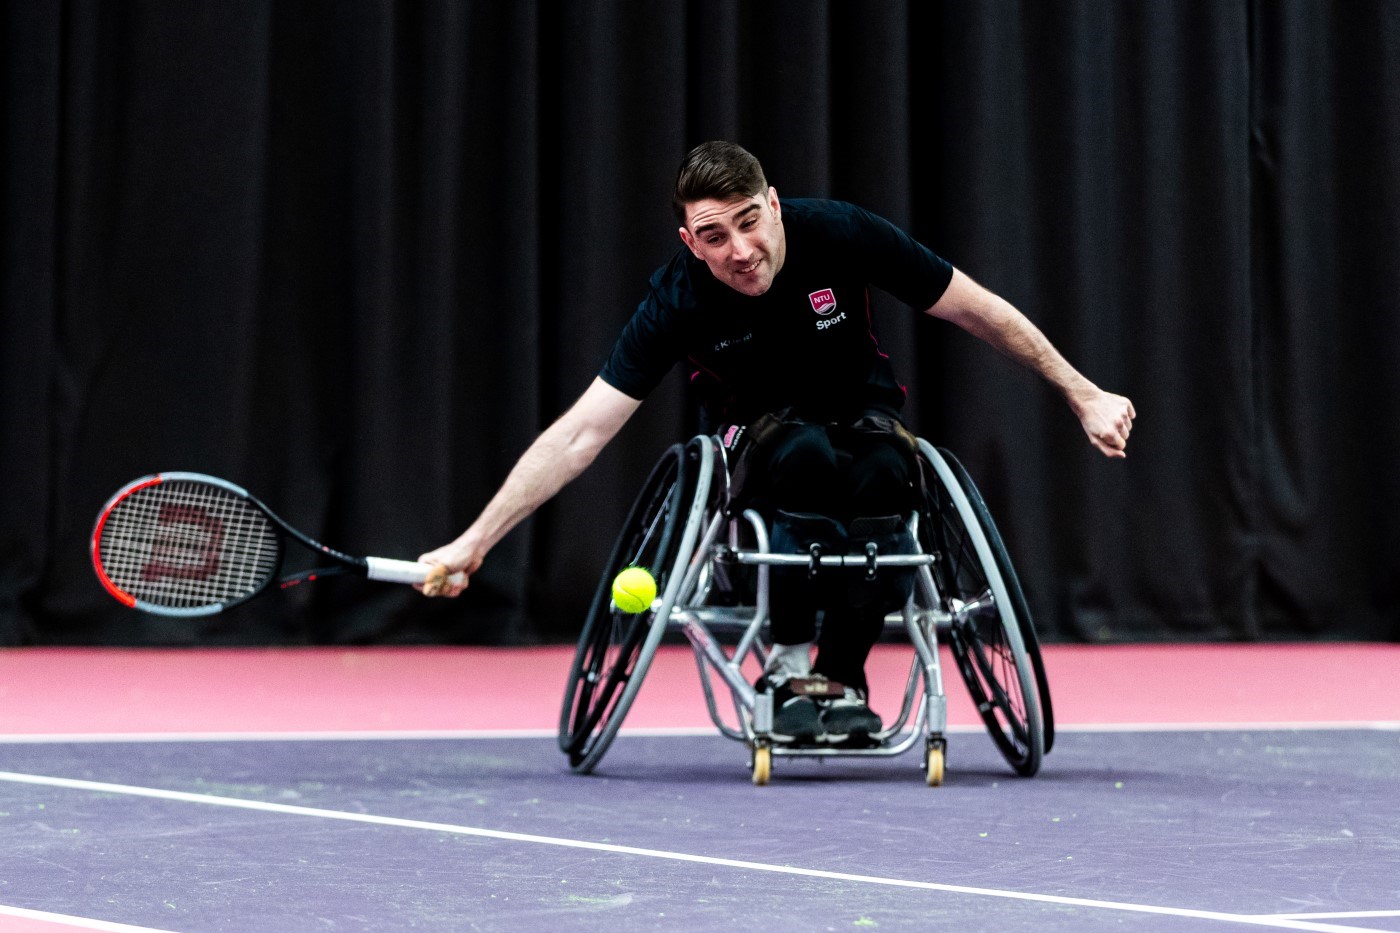 A man in a wheelchair leans forward to try and hit a tennis ball with a racket